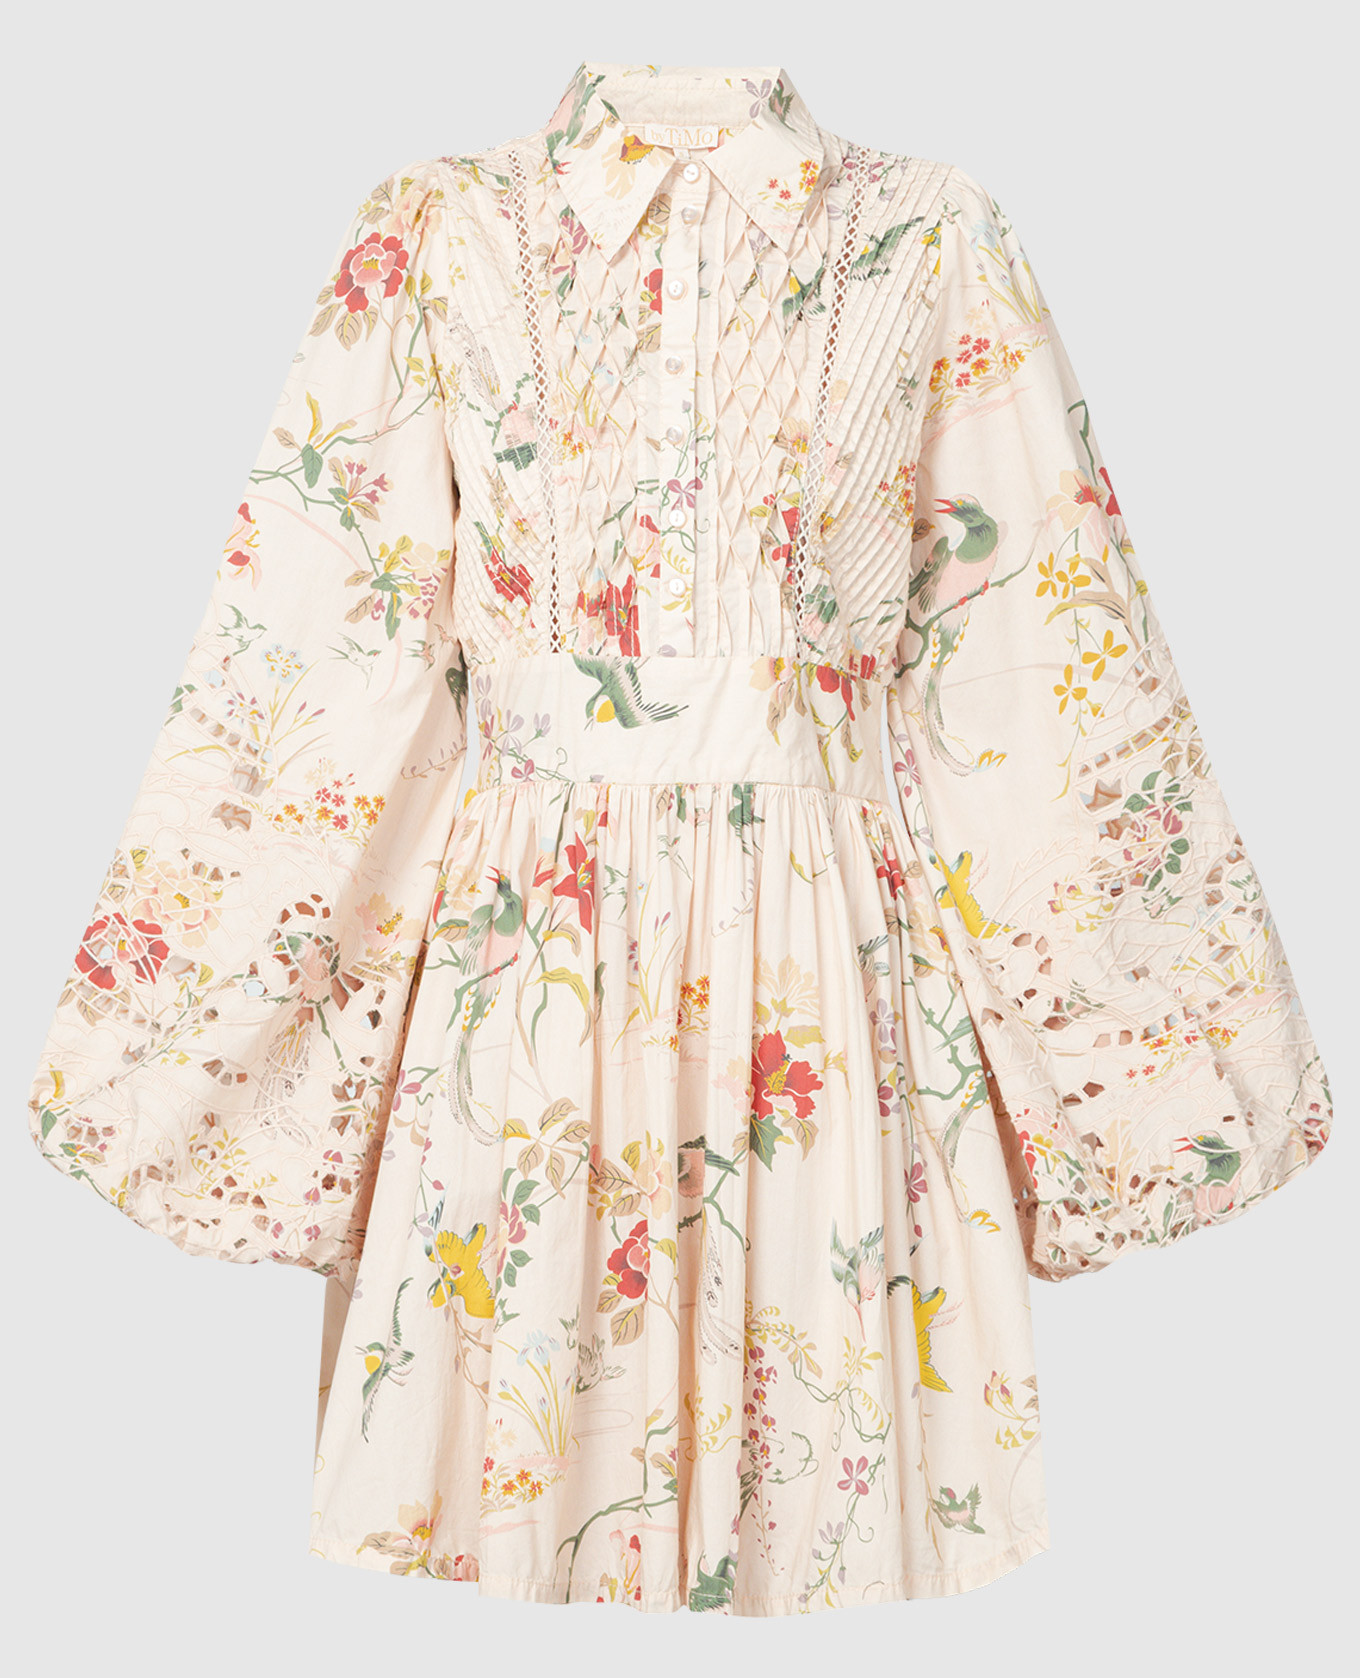 Beige shirt dress in floral print with embroidery